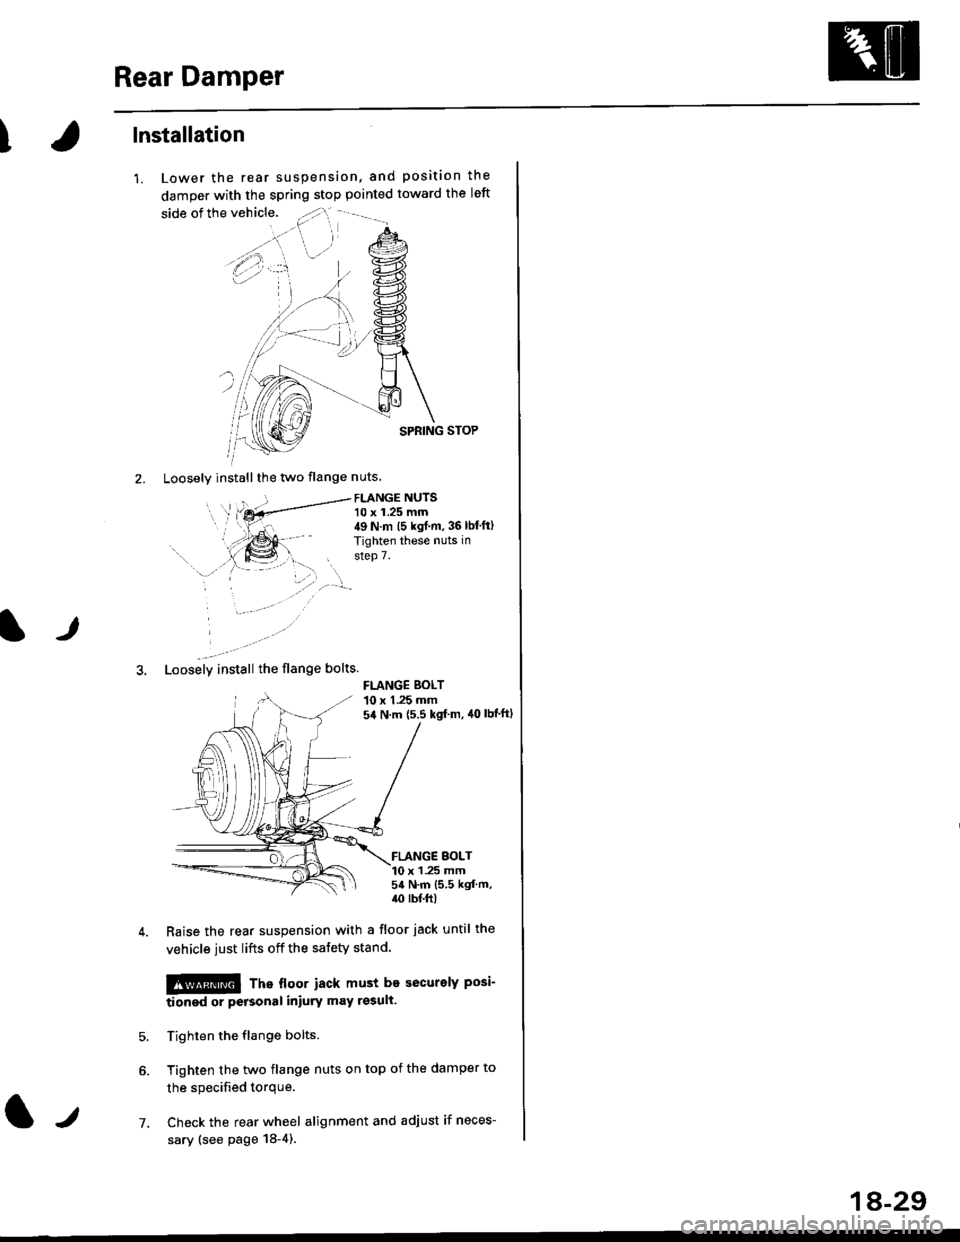 HONDA CIVIC 1996 6.G Service Manual Rear Damper
Ilnstallation
1. Lower the rear suspension, and position the
damper with the spring stop pointed toward the left
SPRING STOP
2. Loosely installthe two flange nuts
FLANGE NUTS10 x 1.25 mm4